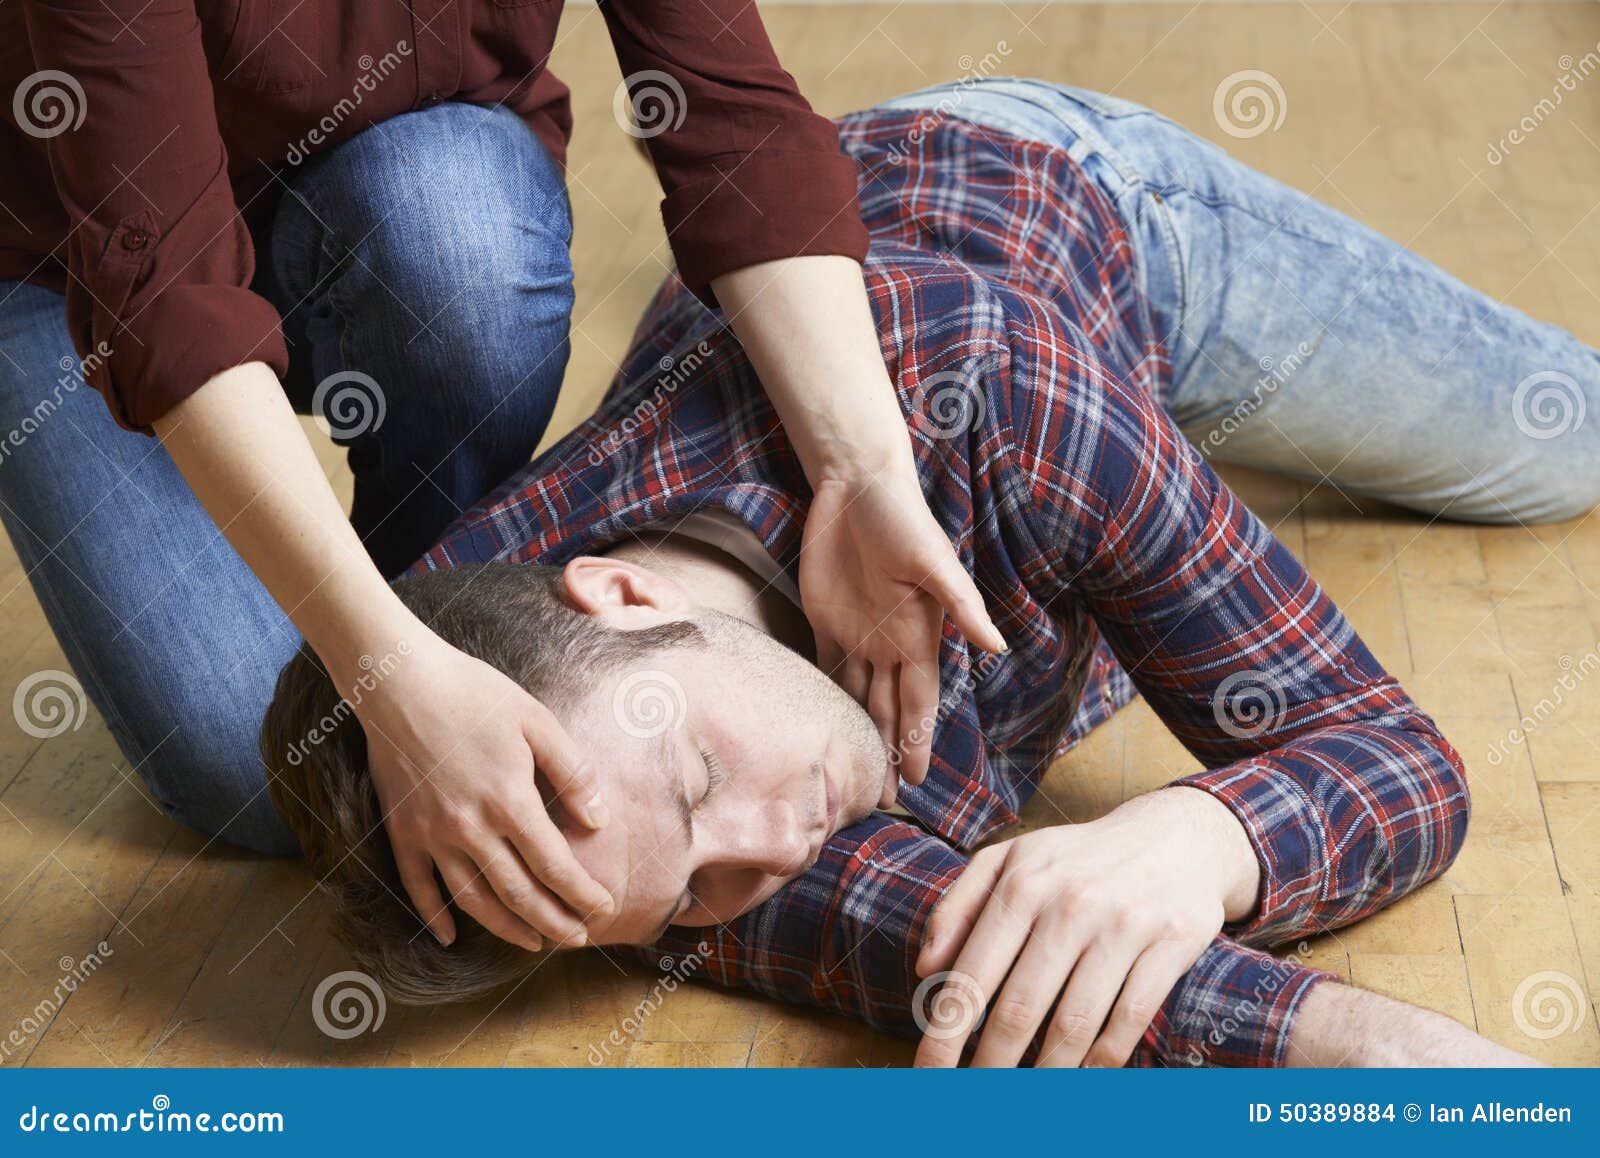 woman placing man in recovery position after accident